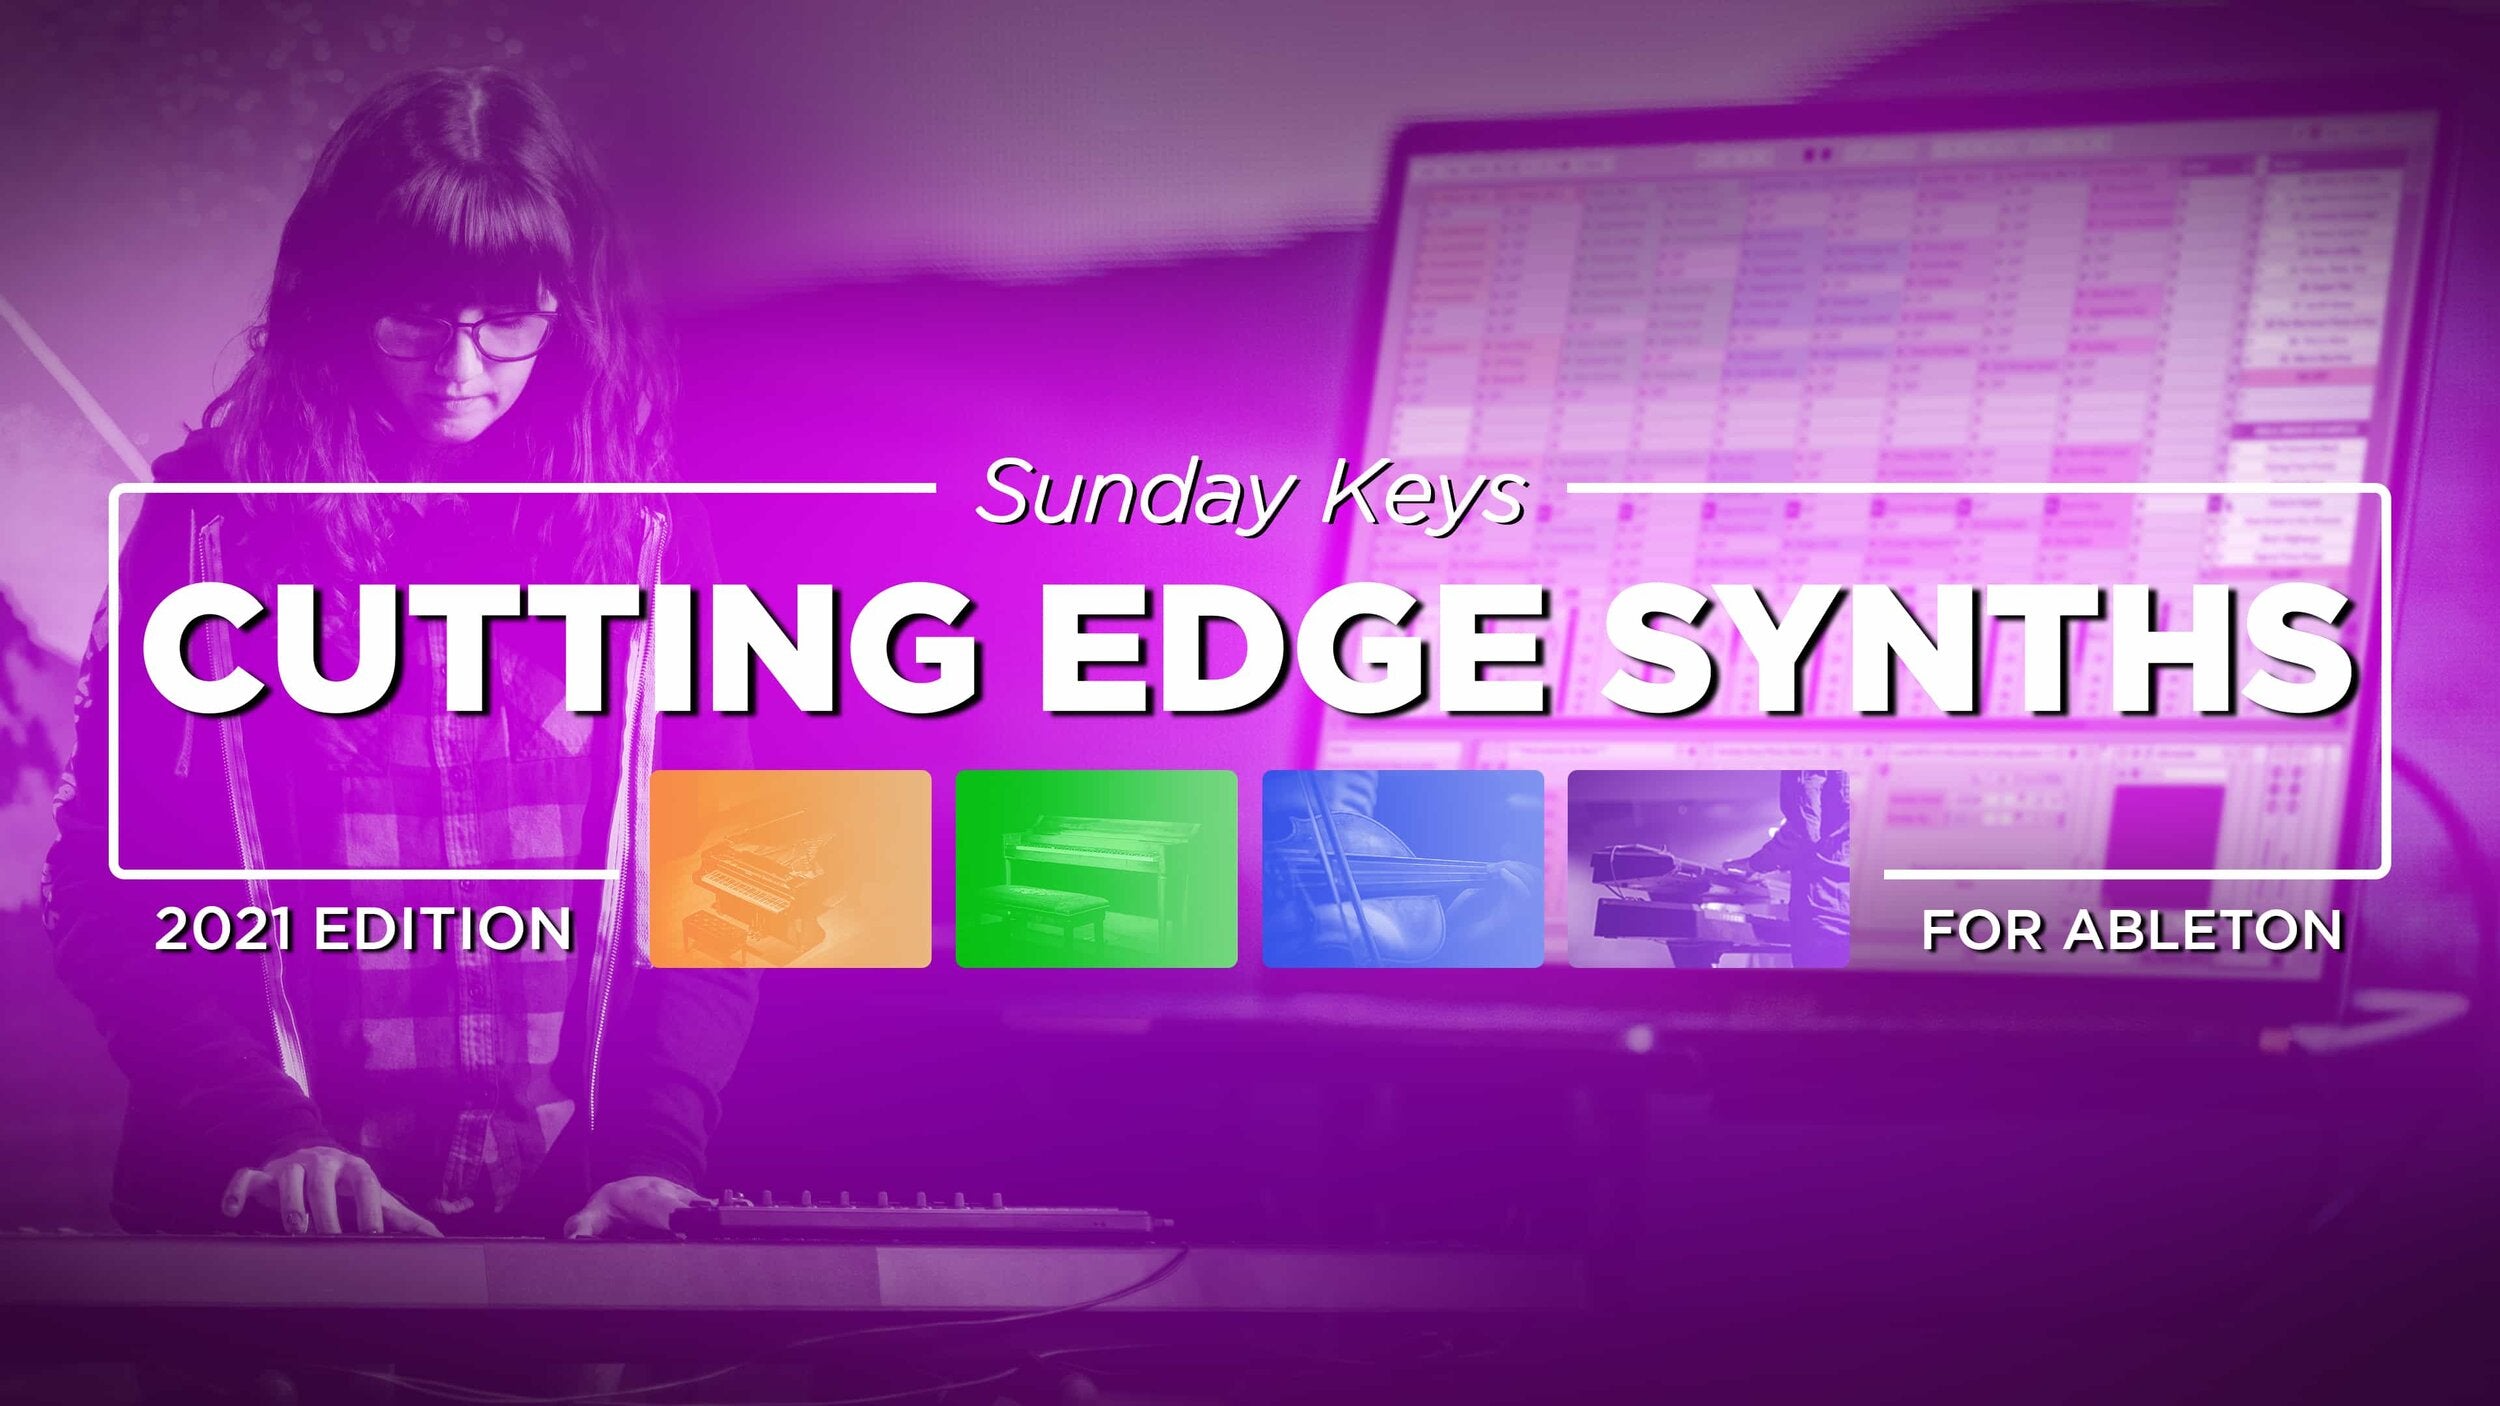 Cutting Edge Synth Sounds - Sunday Keys for Ableton 2021